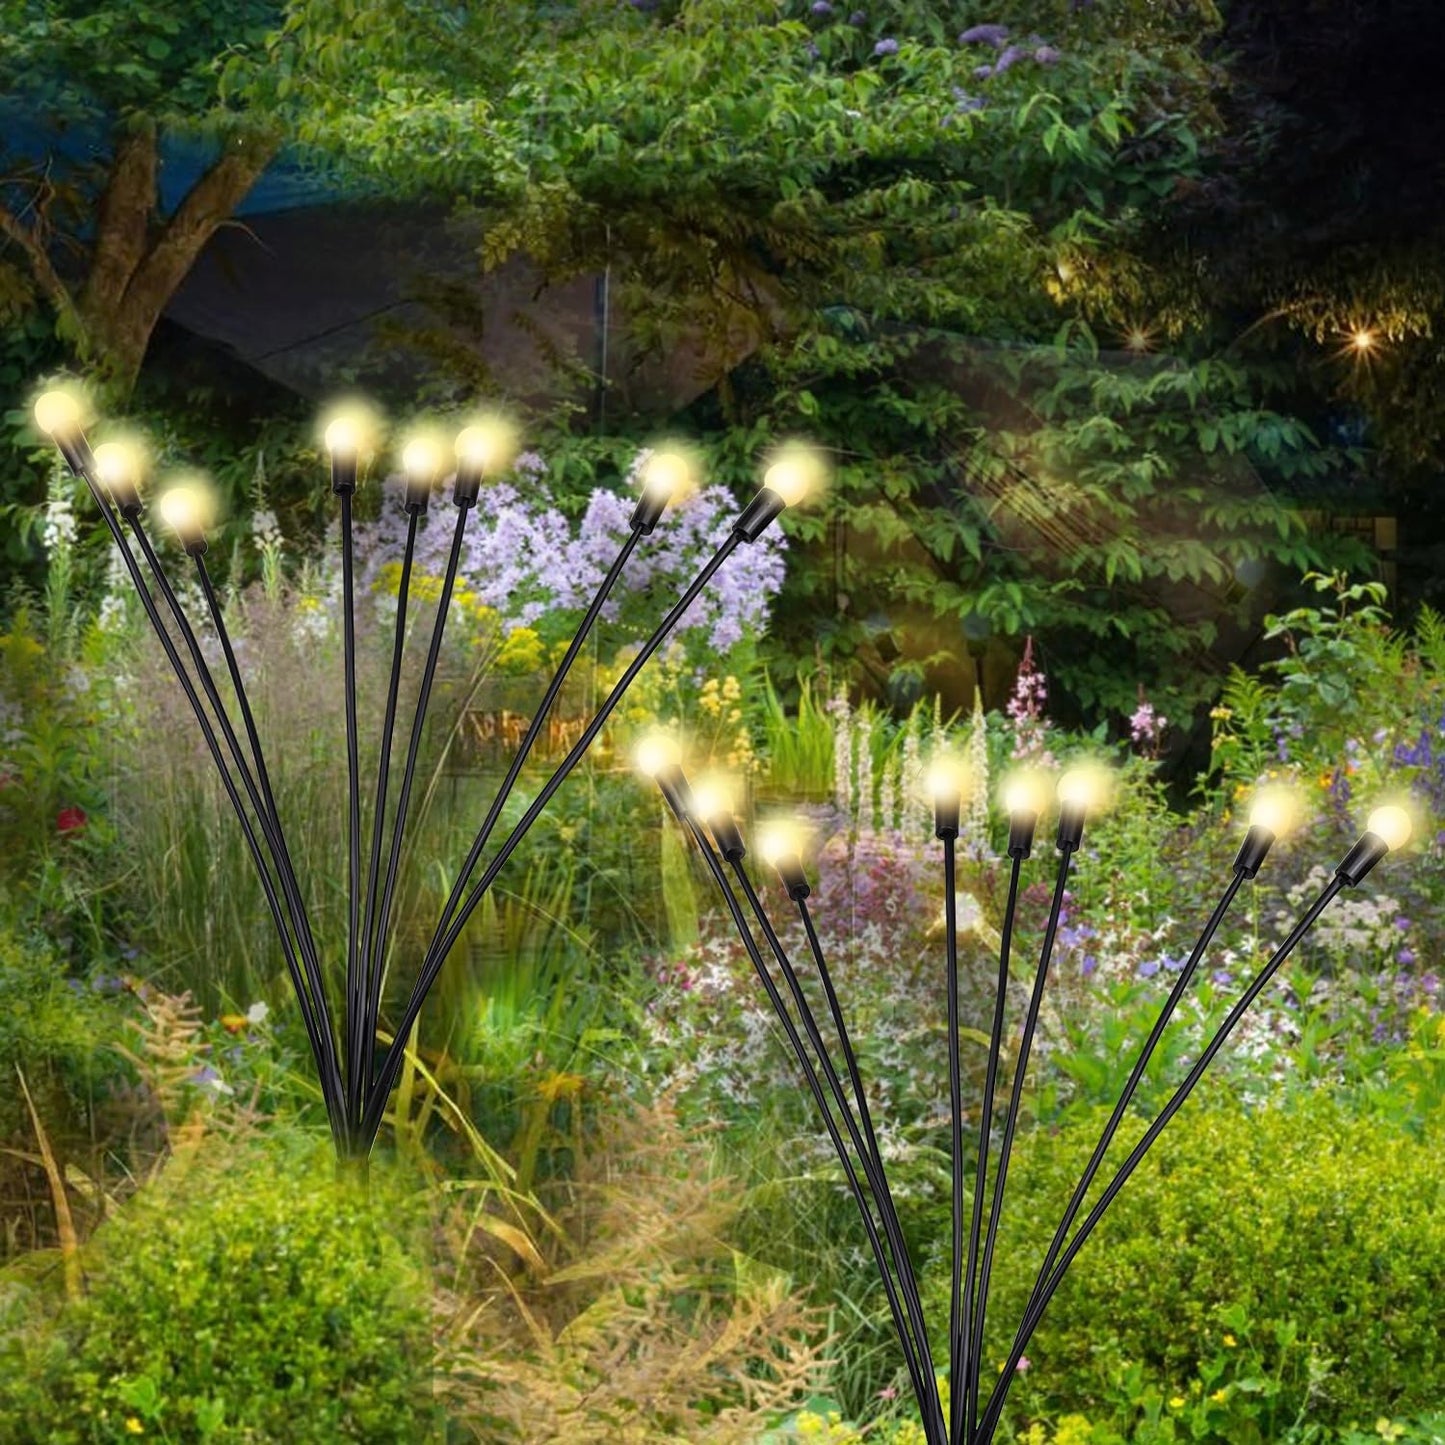 8 LED Solar Garden Lights - Starburst Fountain, Flash Mode, Color Changing, Waterproof